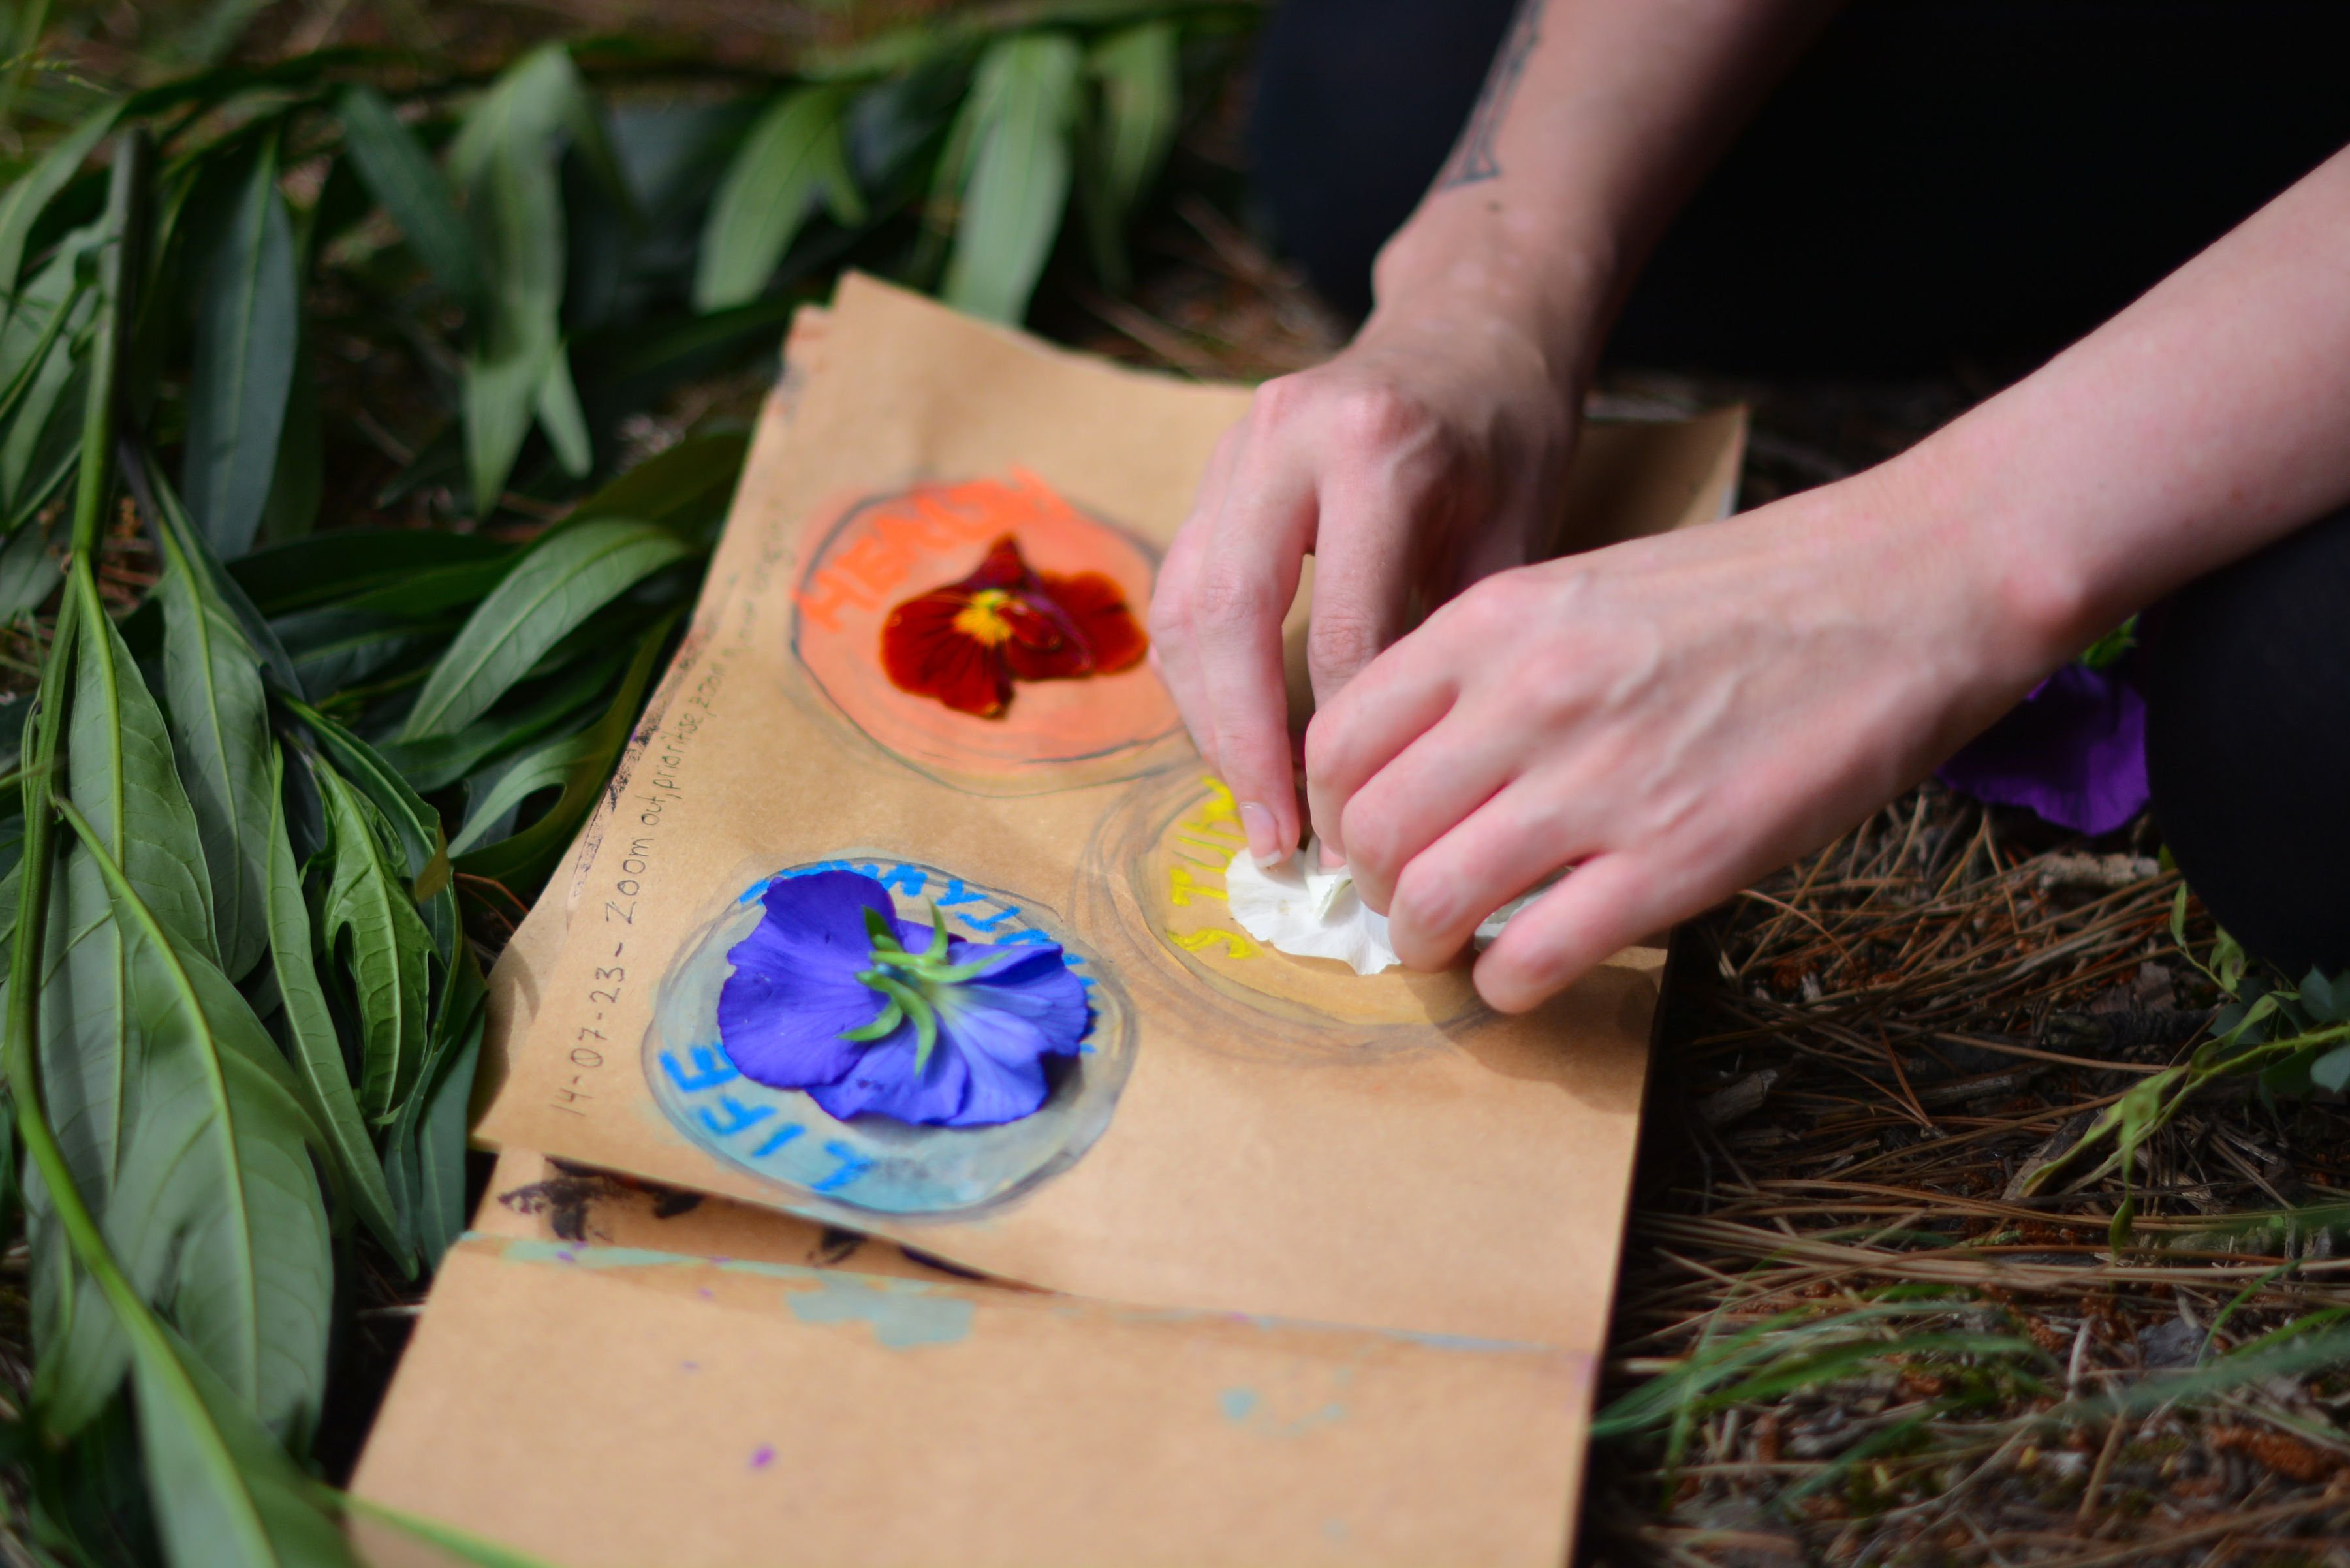 Hands making art with flowers and paint.